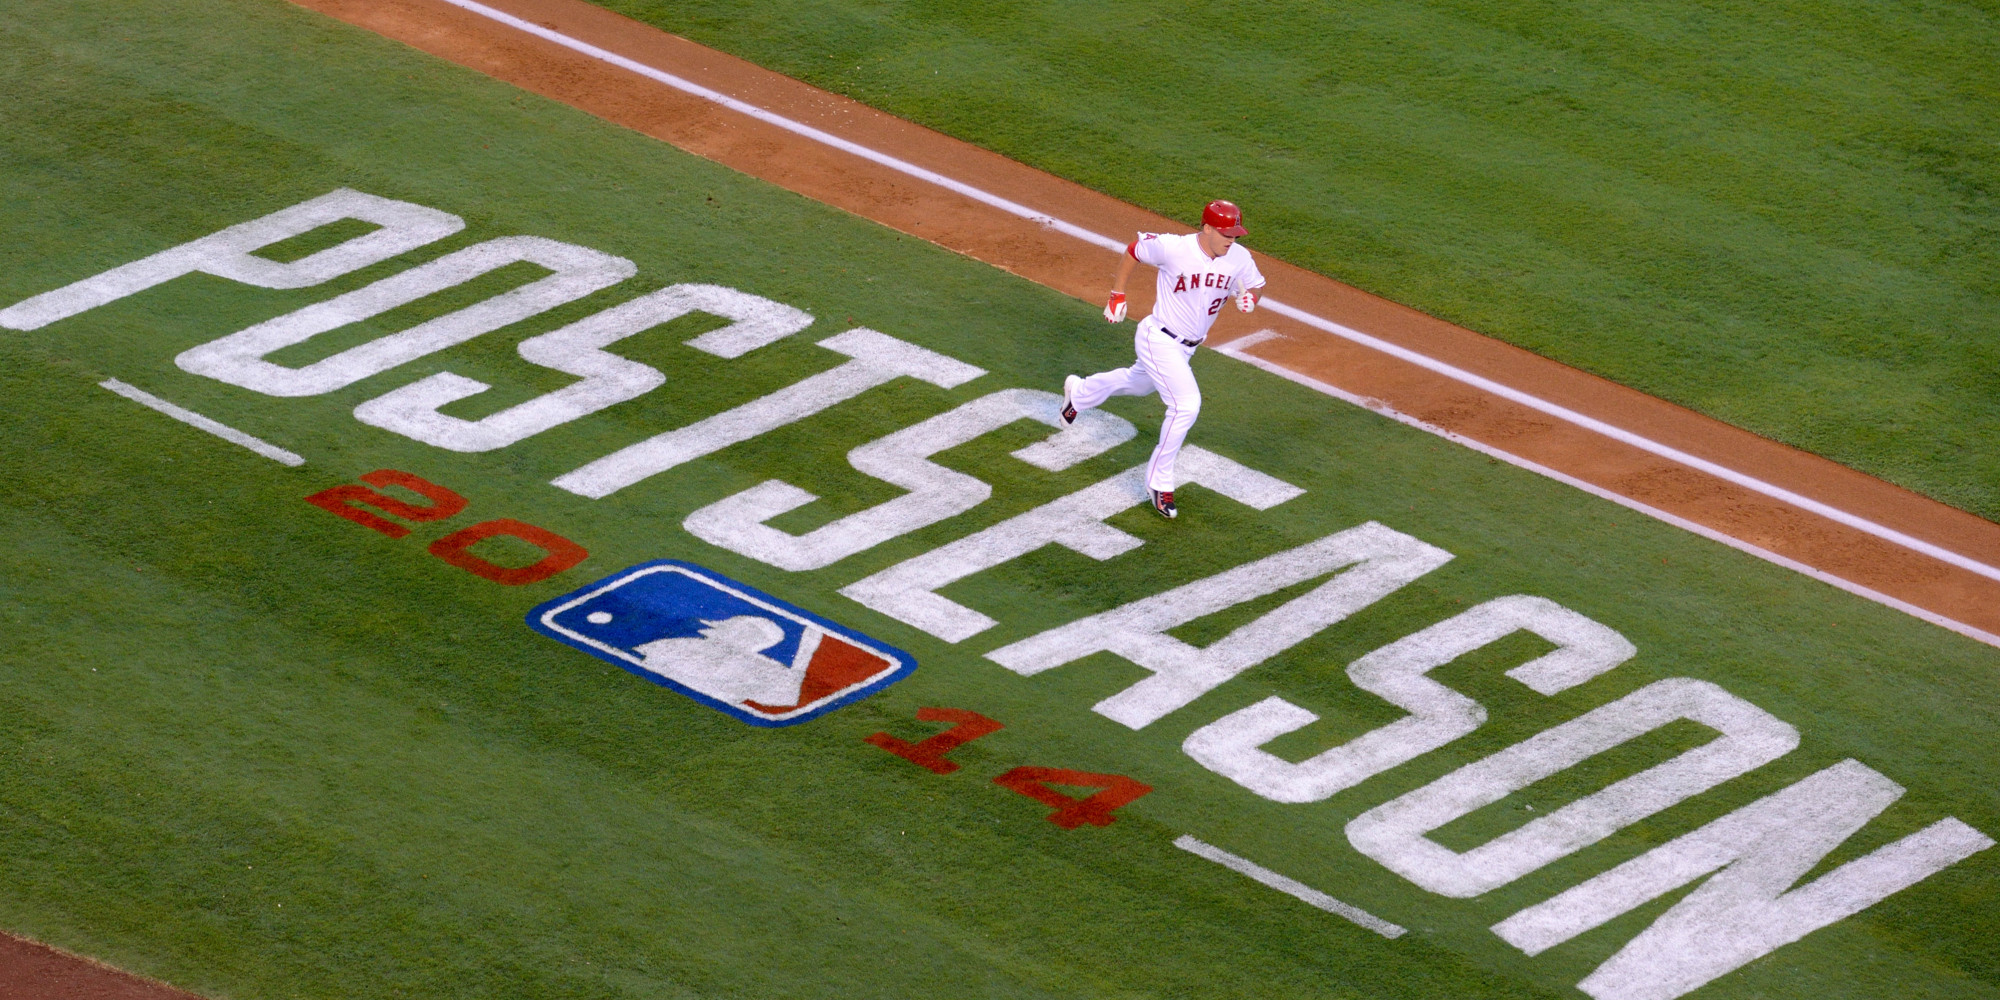 More People Are Watching The MLB Postseason This year HuffPost